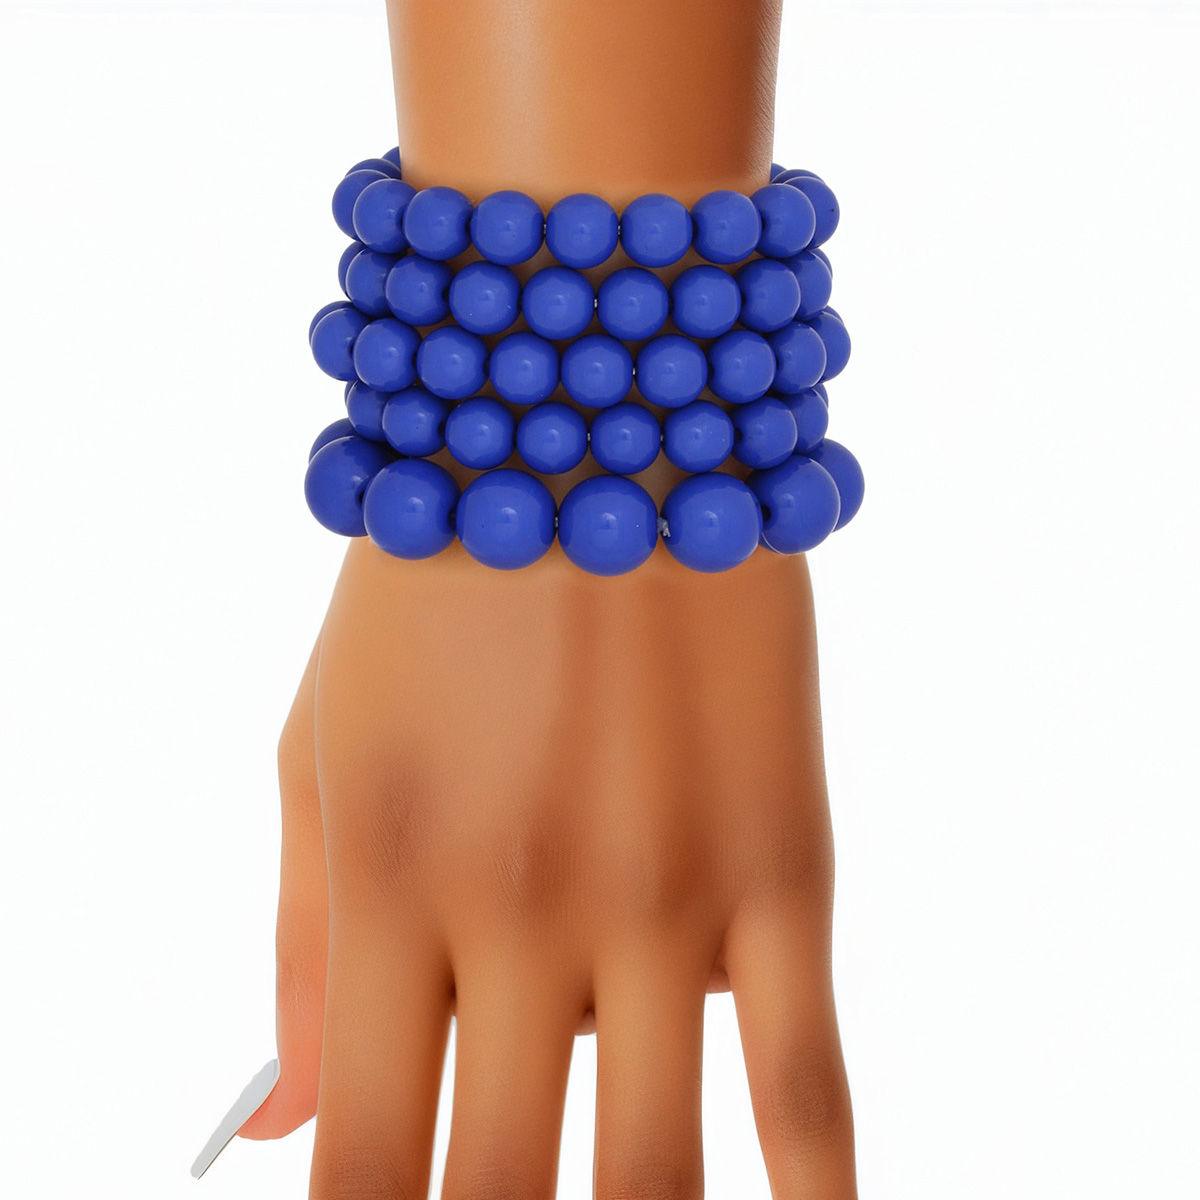 Stylish Matte Blue Bead Bracelets to Up Your Accessory Game